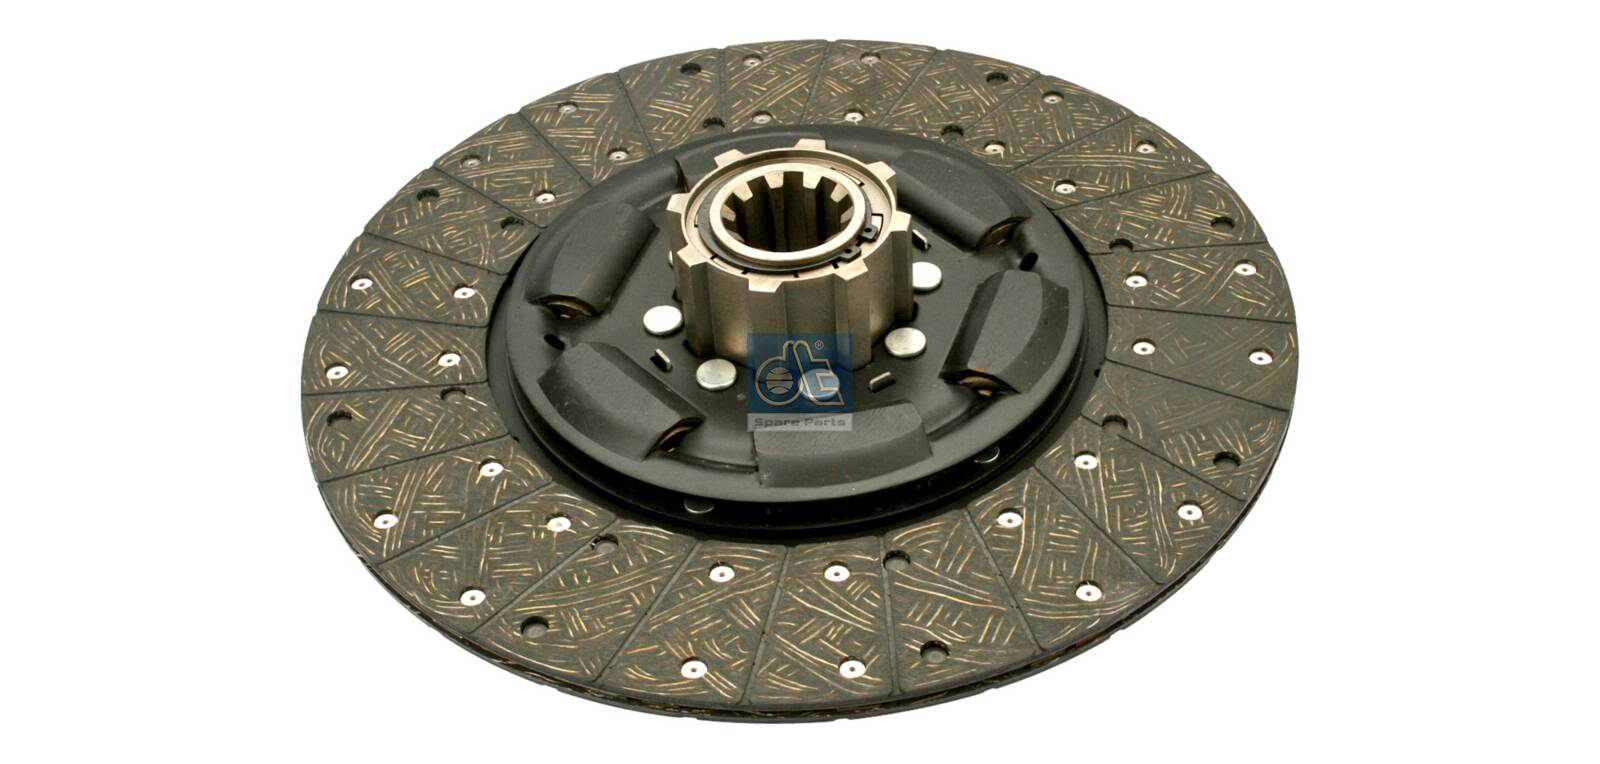 3.40024, Clutch Disc, DT Spare Parts, 0182508603, 04226846, 10720699, 81.30301.0392, 0182508803, 81.30301.0539, 81.30301.0566, A0182508603, 81.30301.9392, A0182508803, 81.30301.9539, 81.30301.9566, 02.02.30.226323, 05.23.104, 0691653, 08.270.1000.643, 100643, 105101, 1878002263, 1878002643, 202.349, 340001920, 76528, 806205, 202.349-01, 4528, 807734, 1878002643AT, 4528M.I., 807736